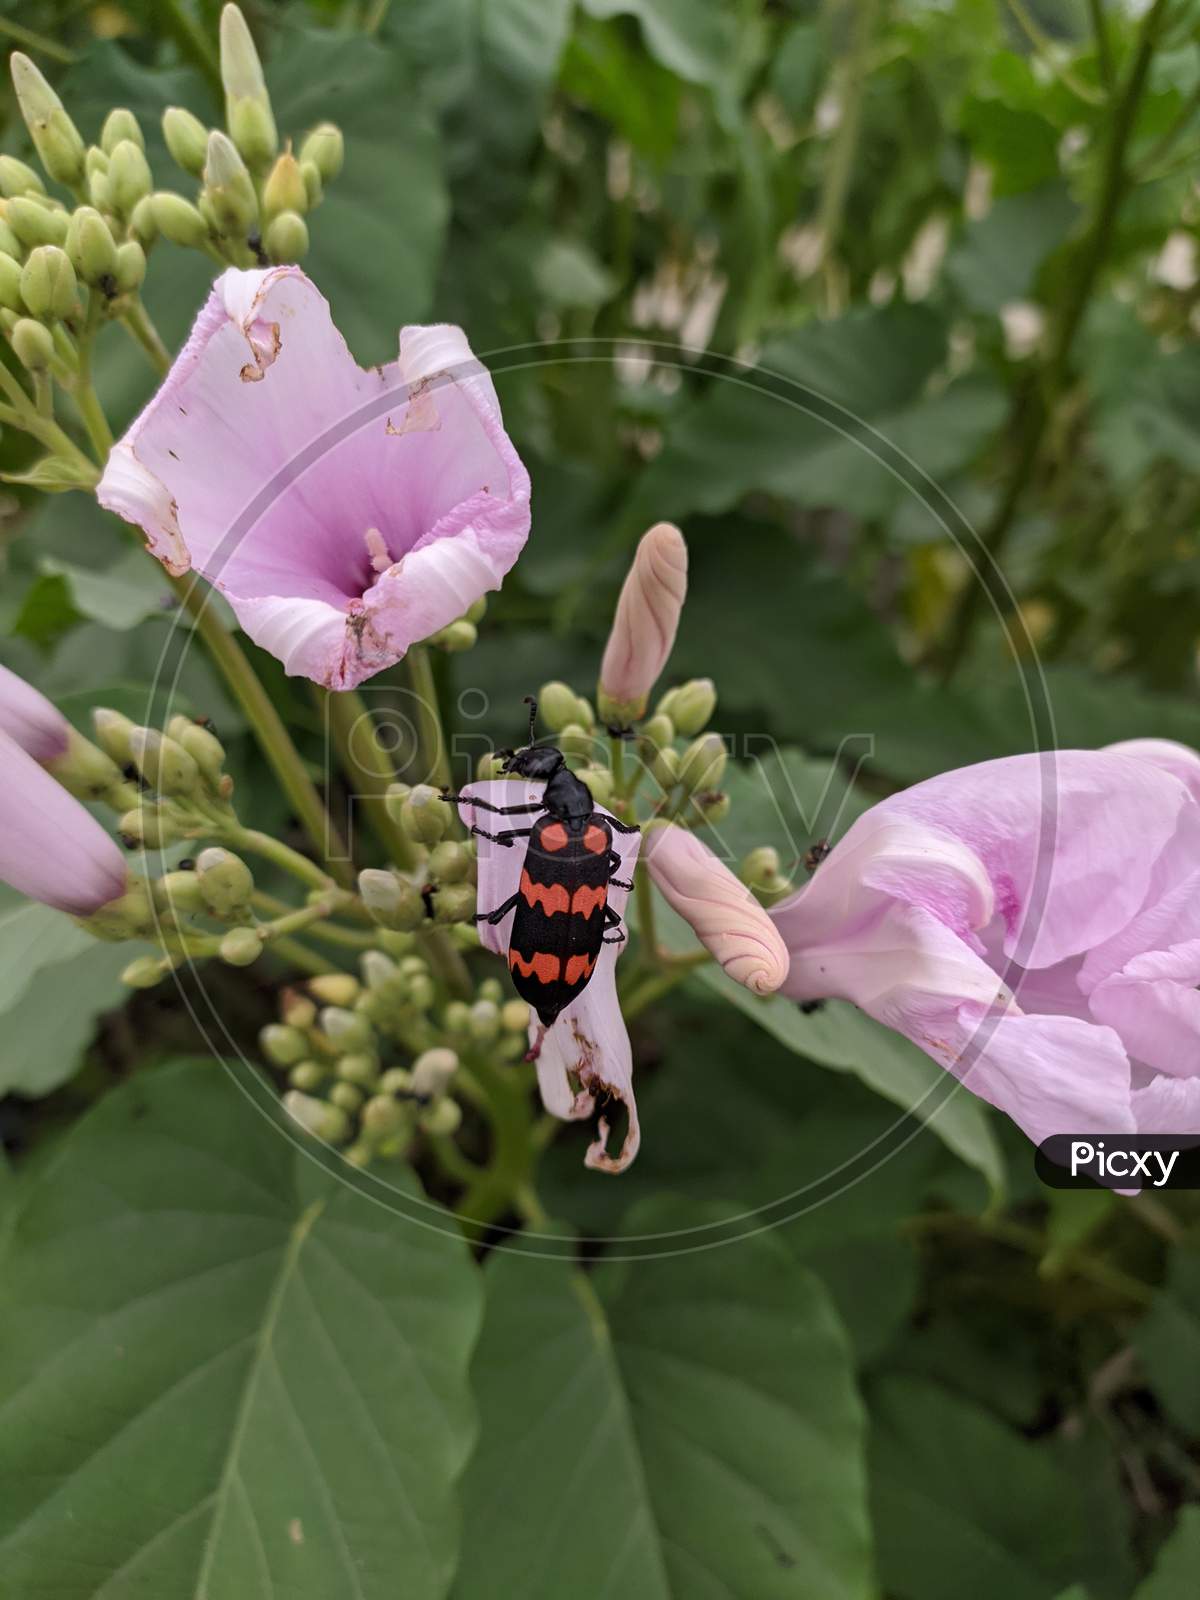 Orange and Black Insect sitting on the Pink Flower